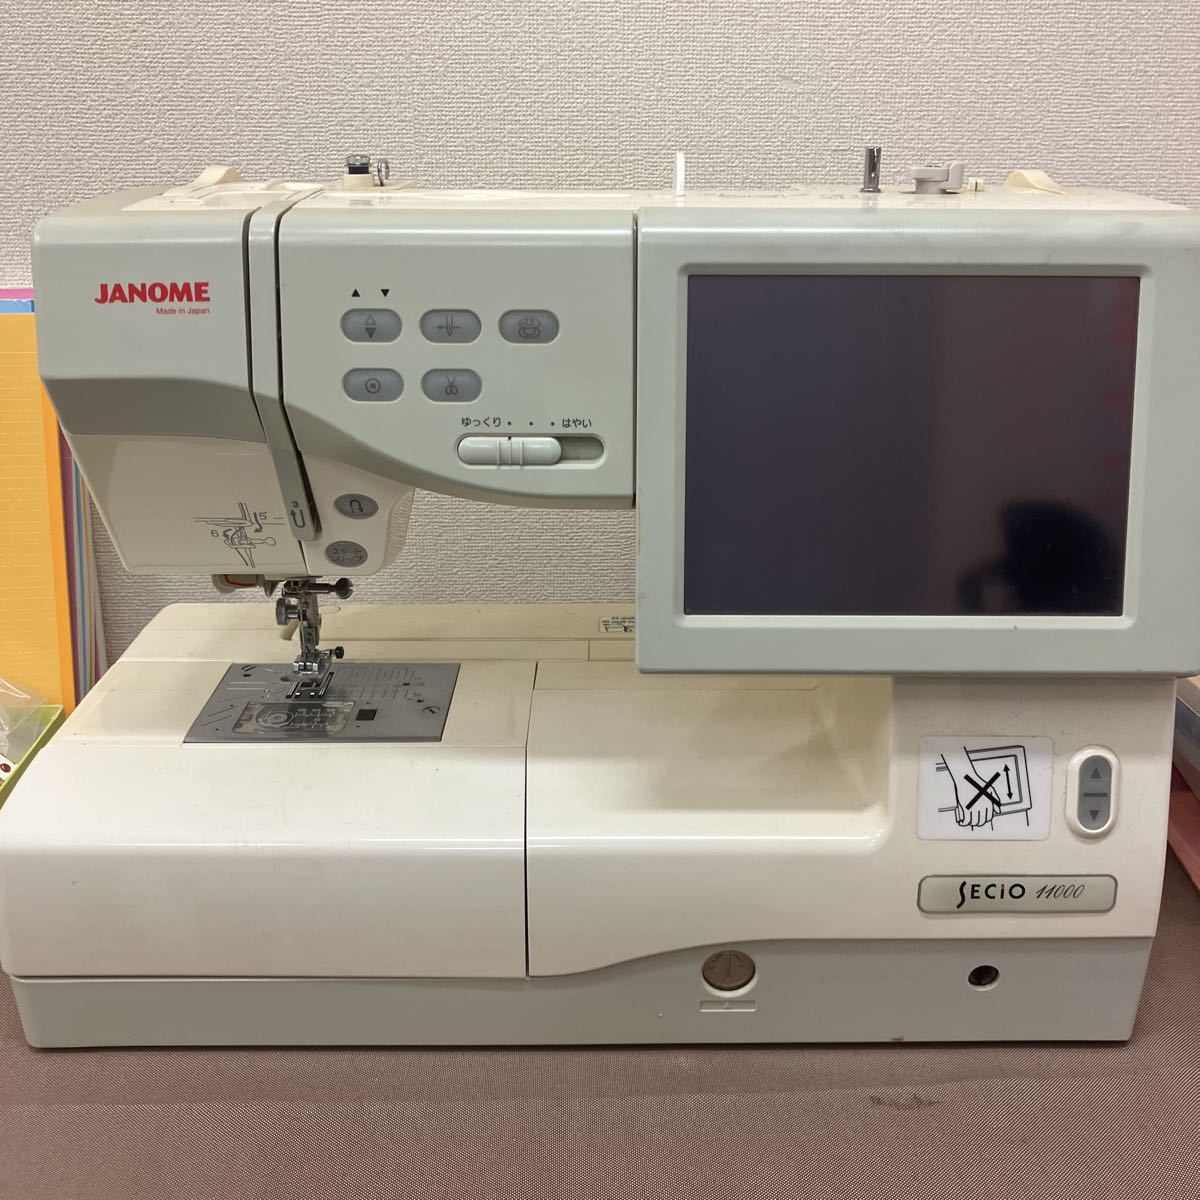 JANOME S6070 コンピューターミシン-